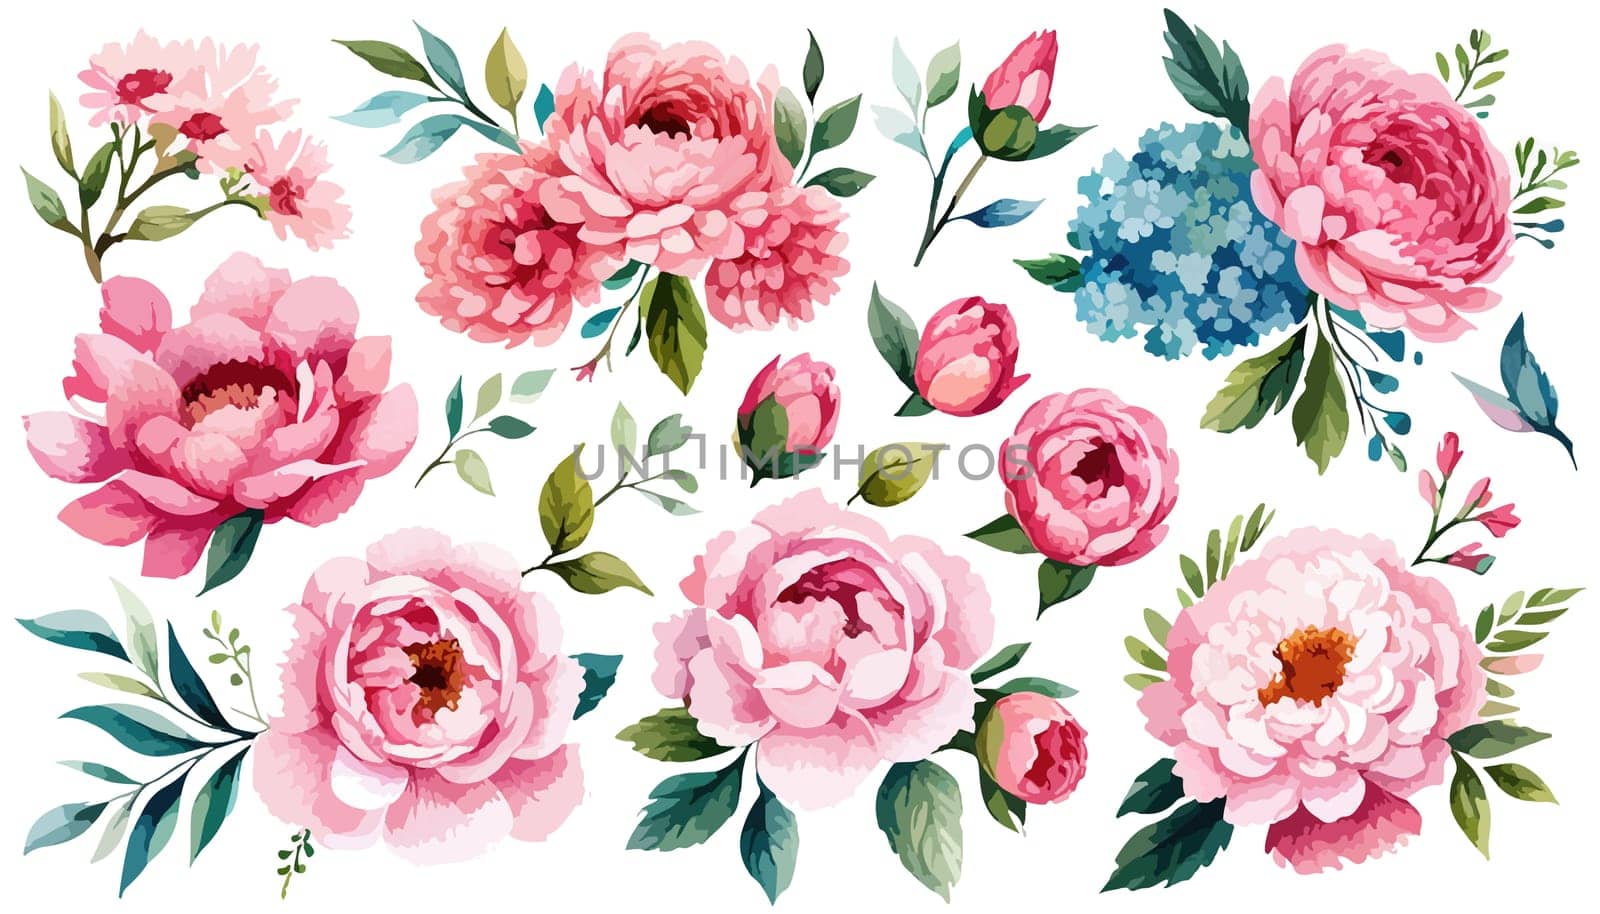 Pink Peonies on white isolated background. Watercolor flowers. Watercolor floral illustration set